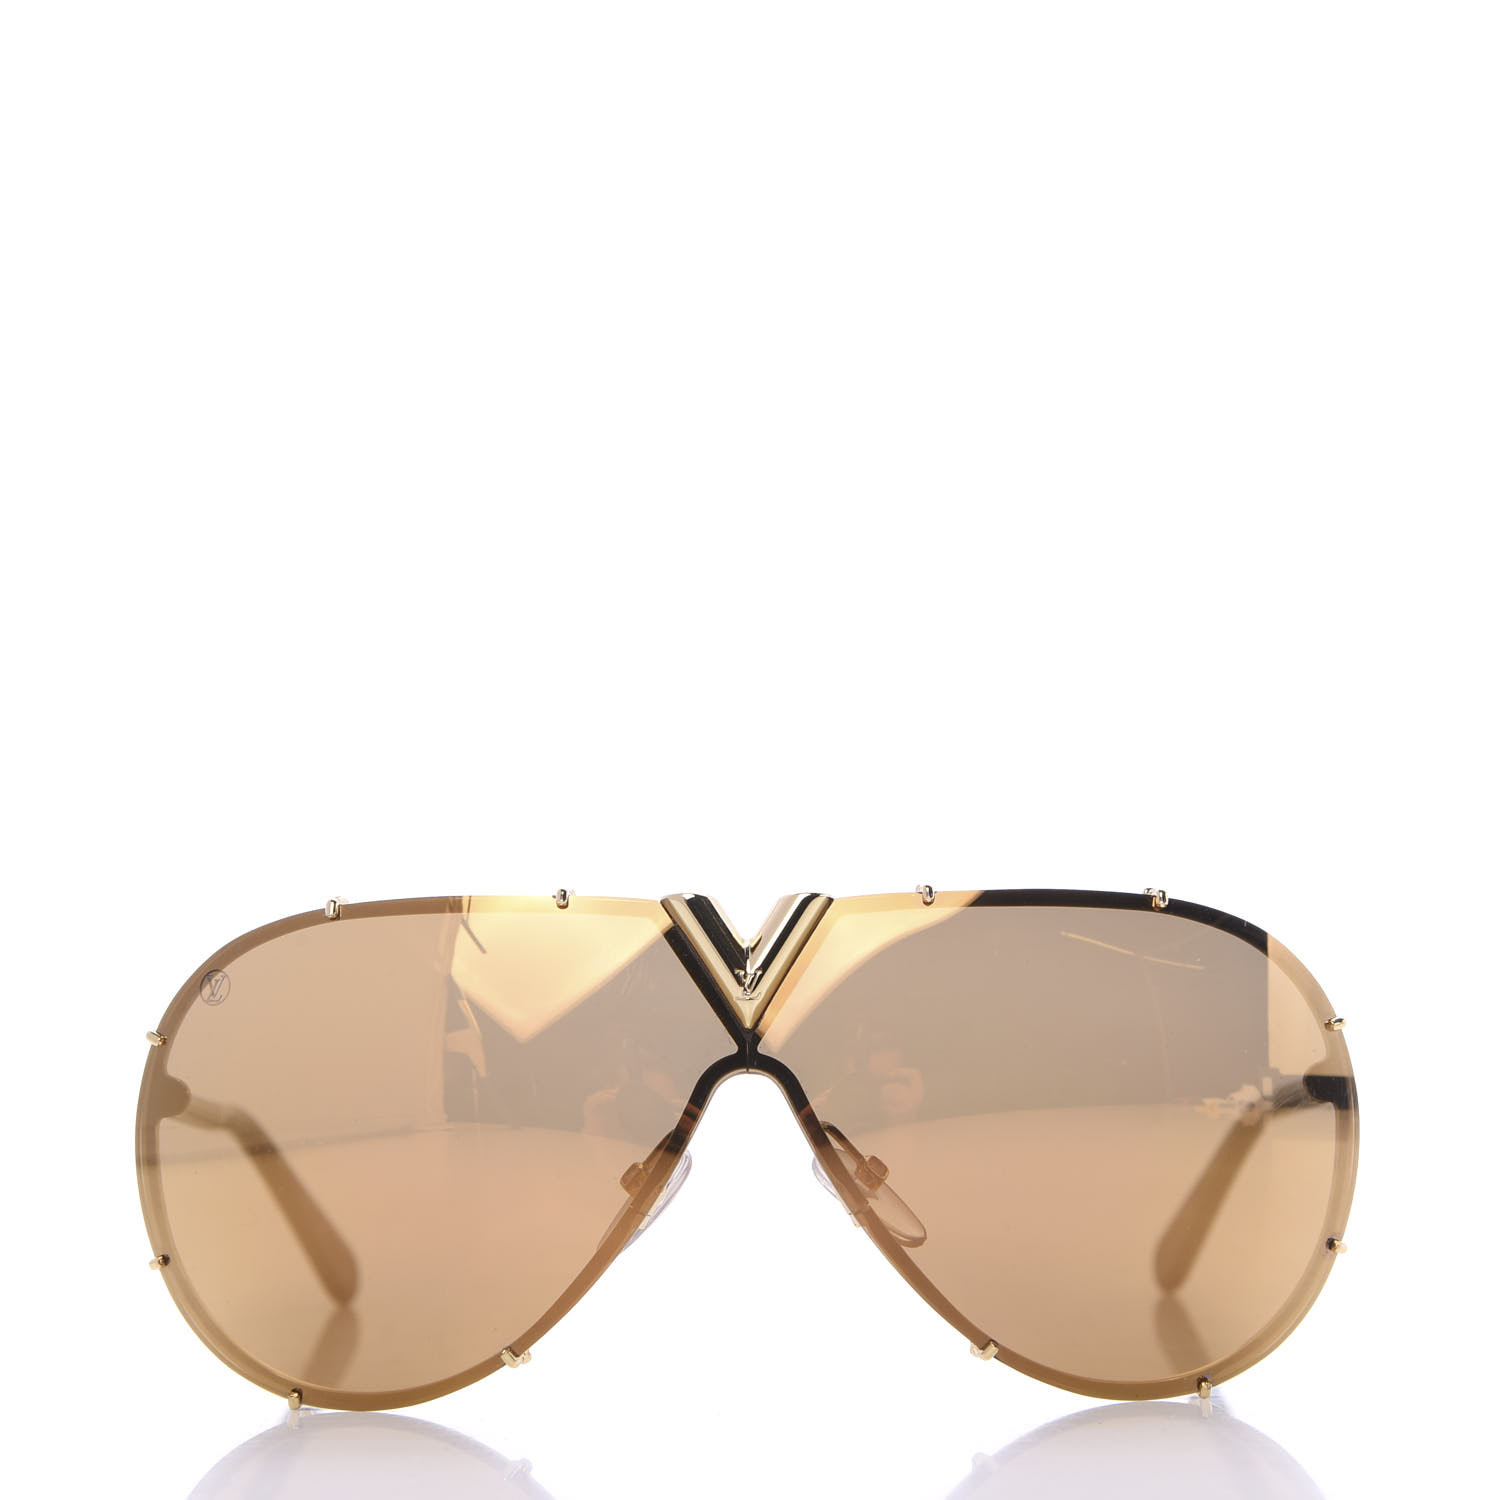 Louis Vuitton Party Glasses  Natural Resource Department